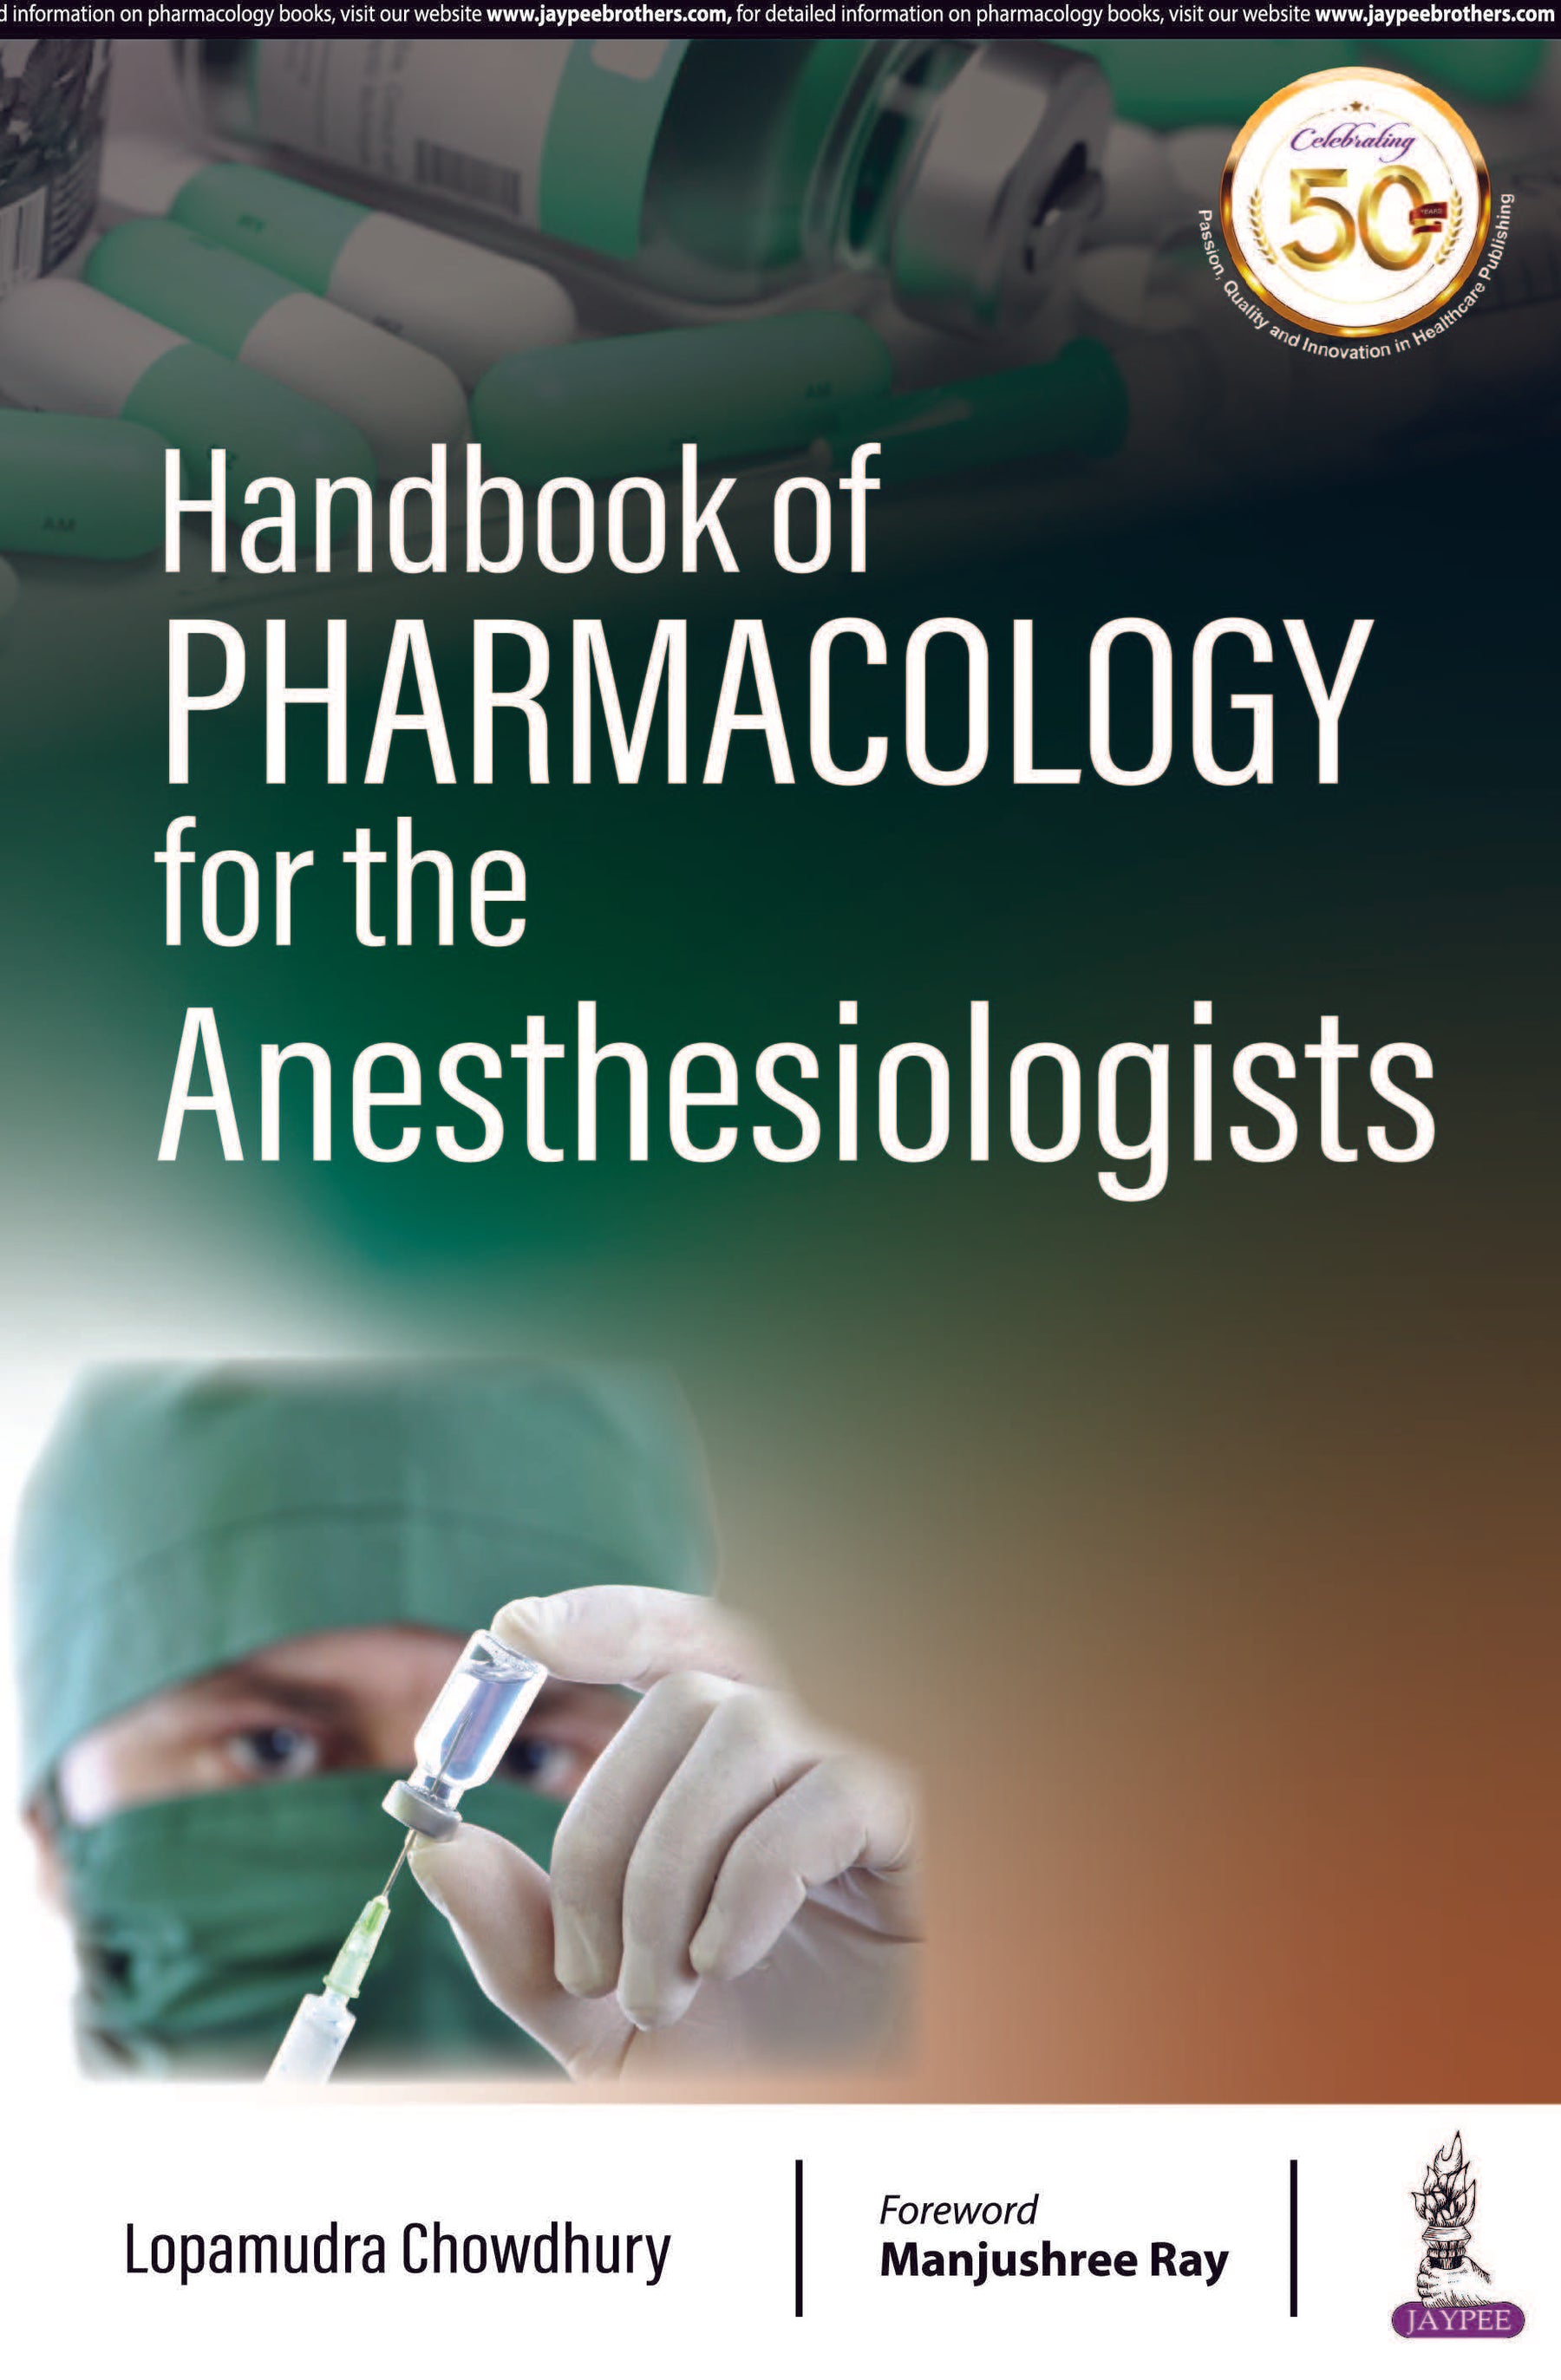 HANDBOOK OF PHARMACOLOGY FOR THE ANESTHESIOLOGISTS,1/E,LOPAMUDRA CHOWDHURY